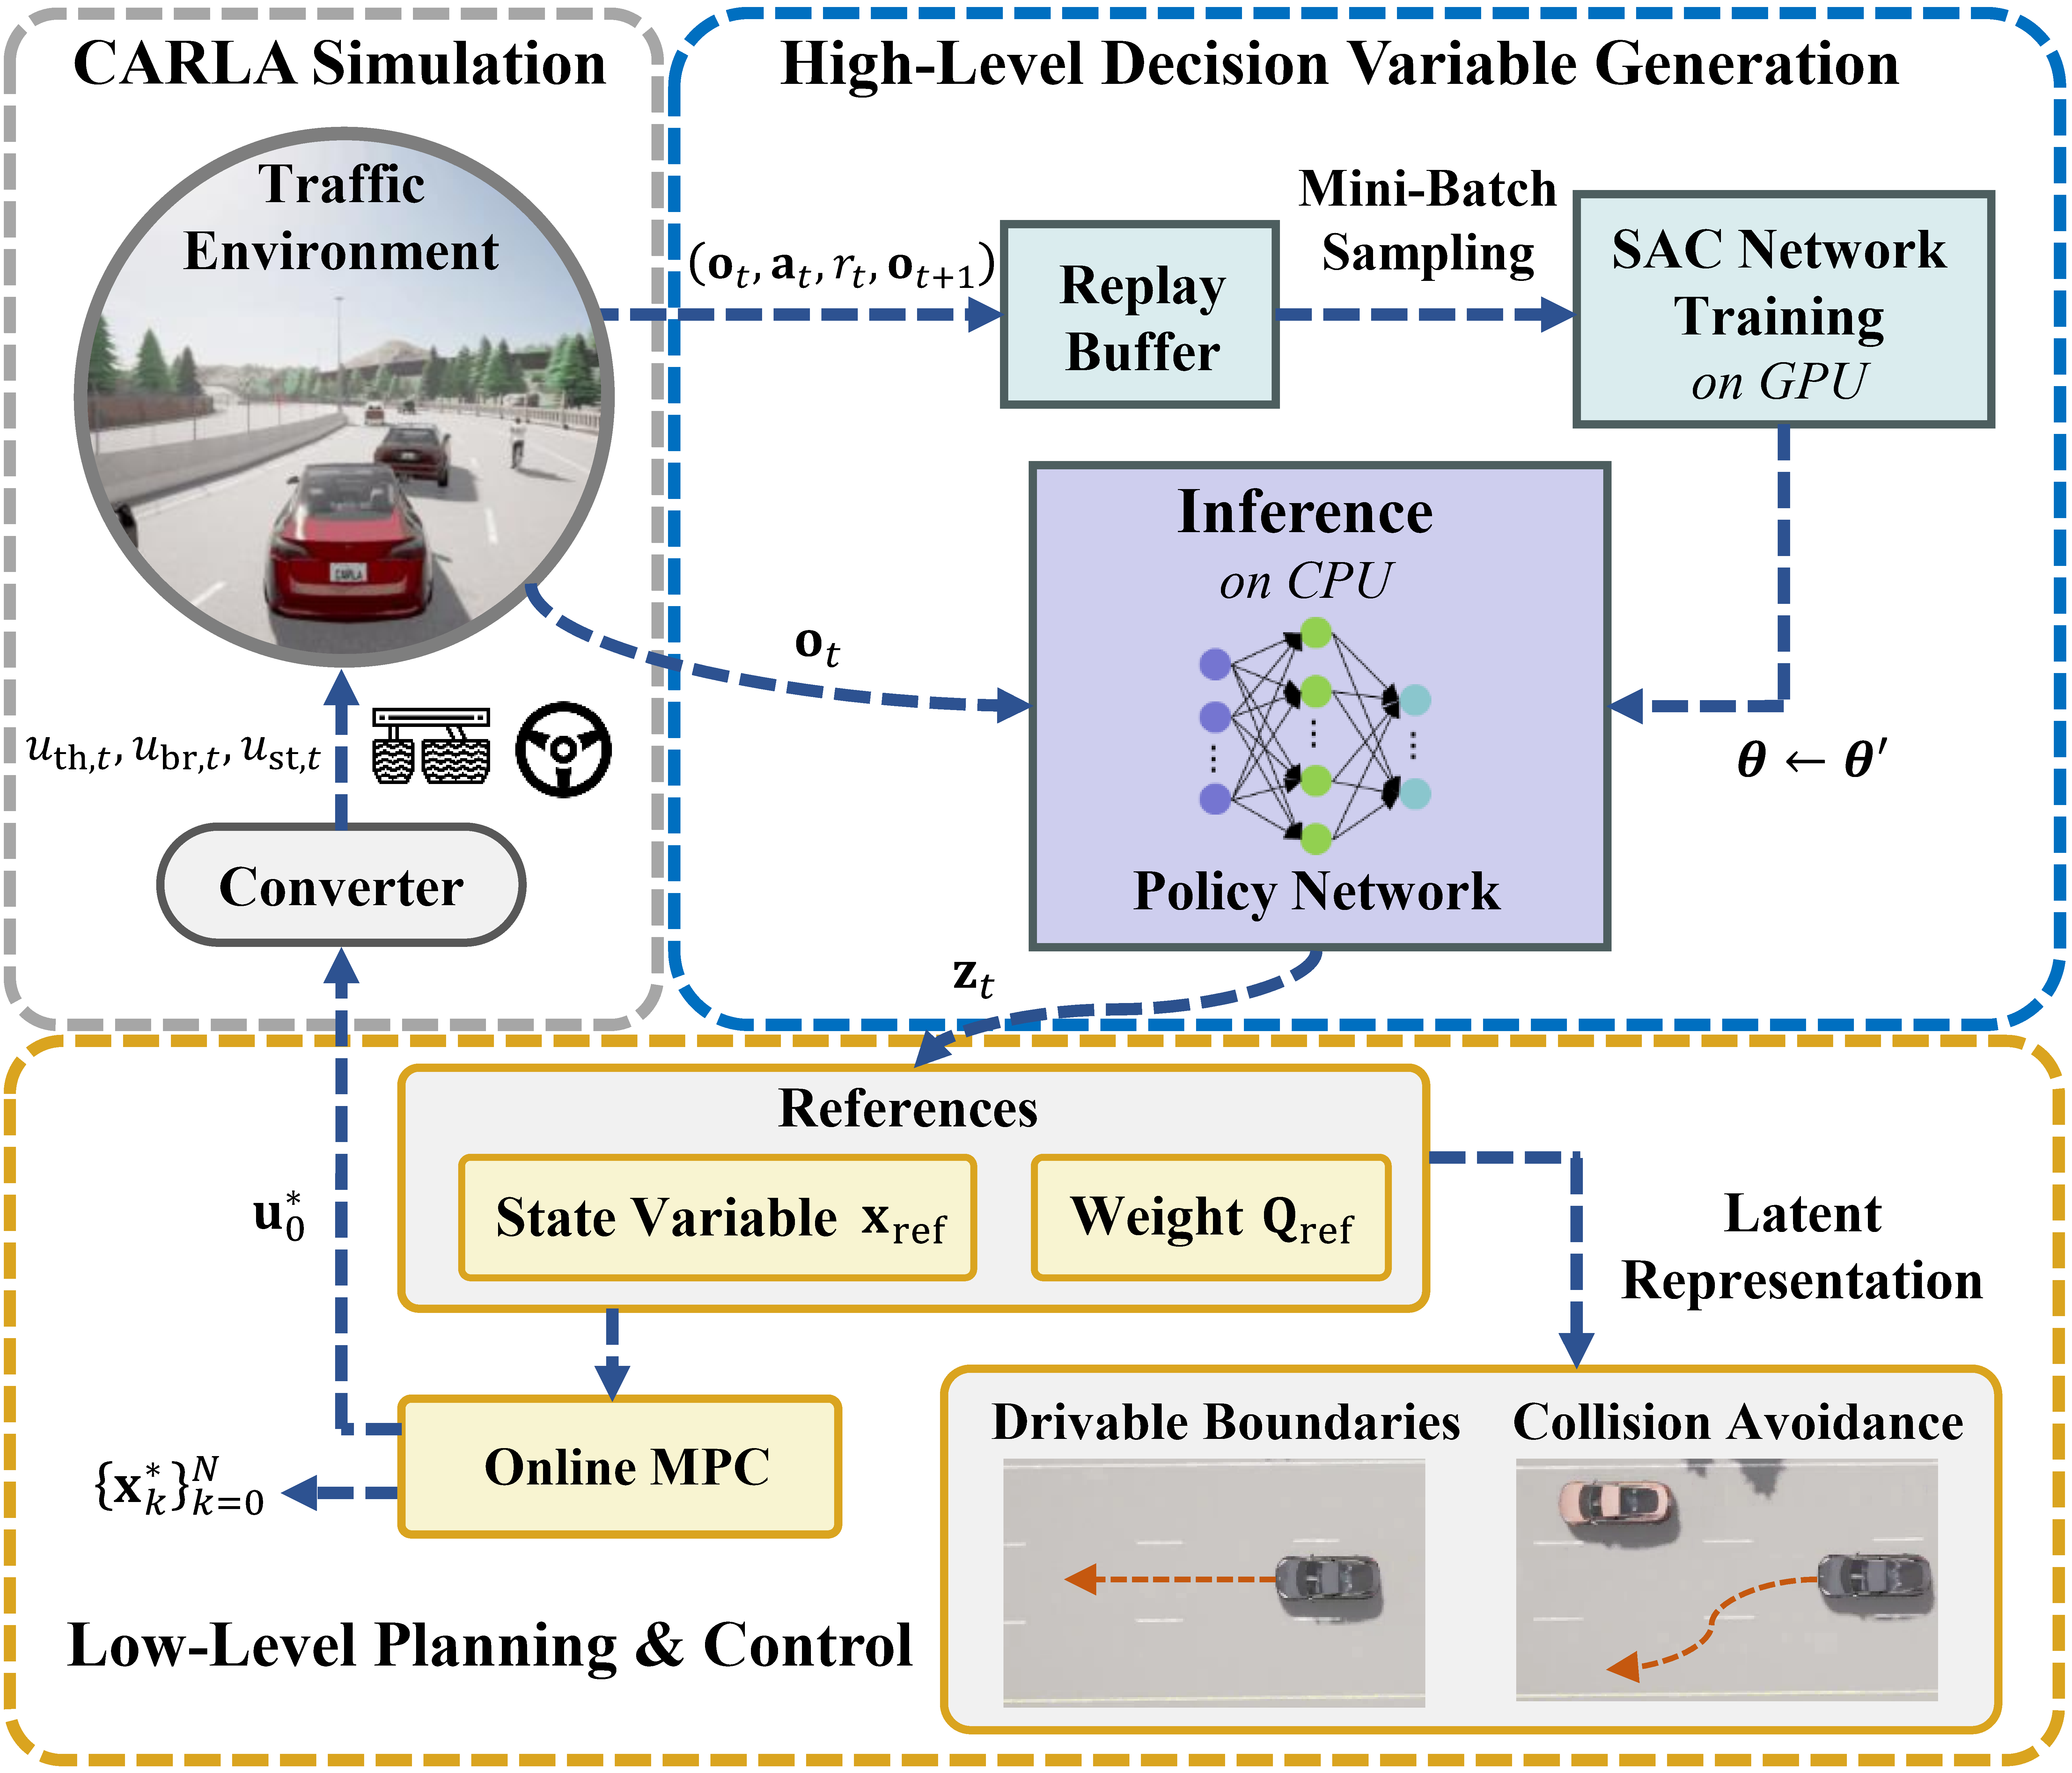 A policy network is trained to produce instantaneous decision variables for low-level online MPC, whose cost functions are modulated to latently encode the safety conditions of collision avoidance and driveable surface boundaries